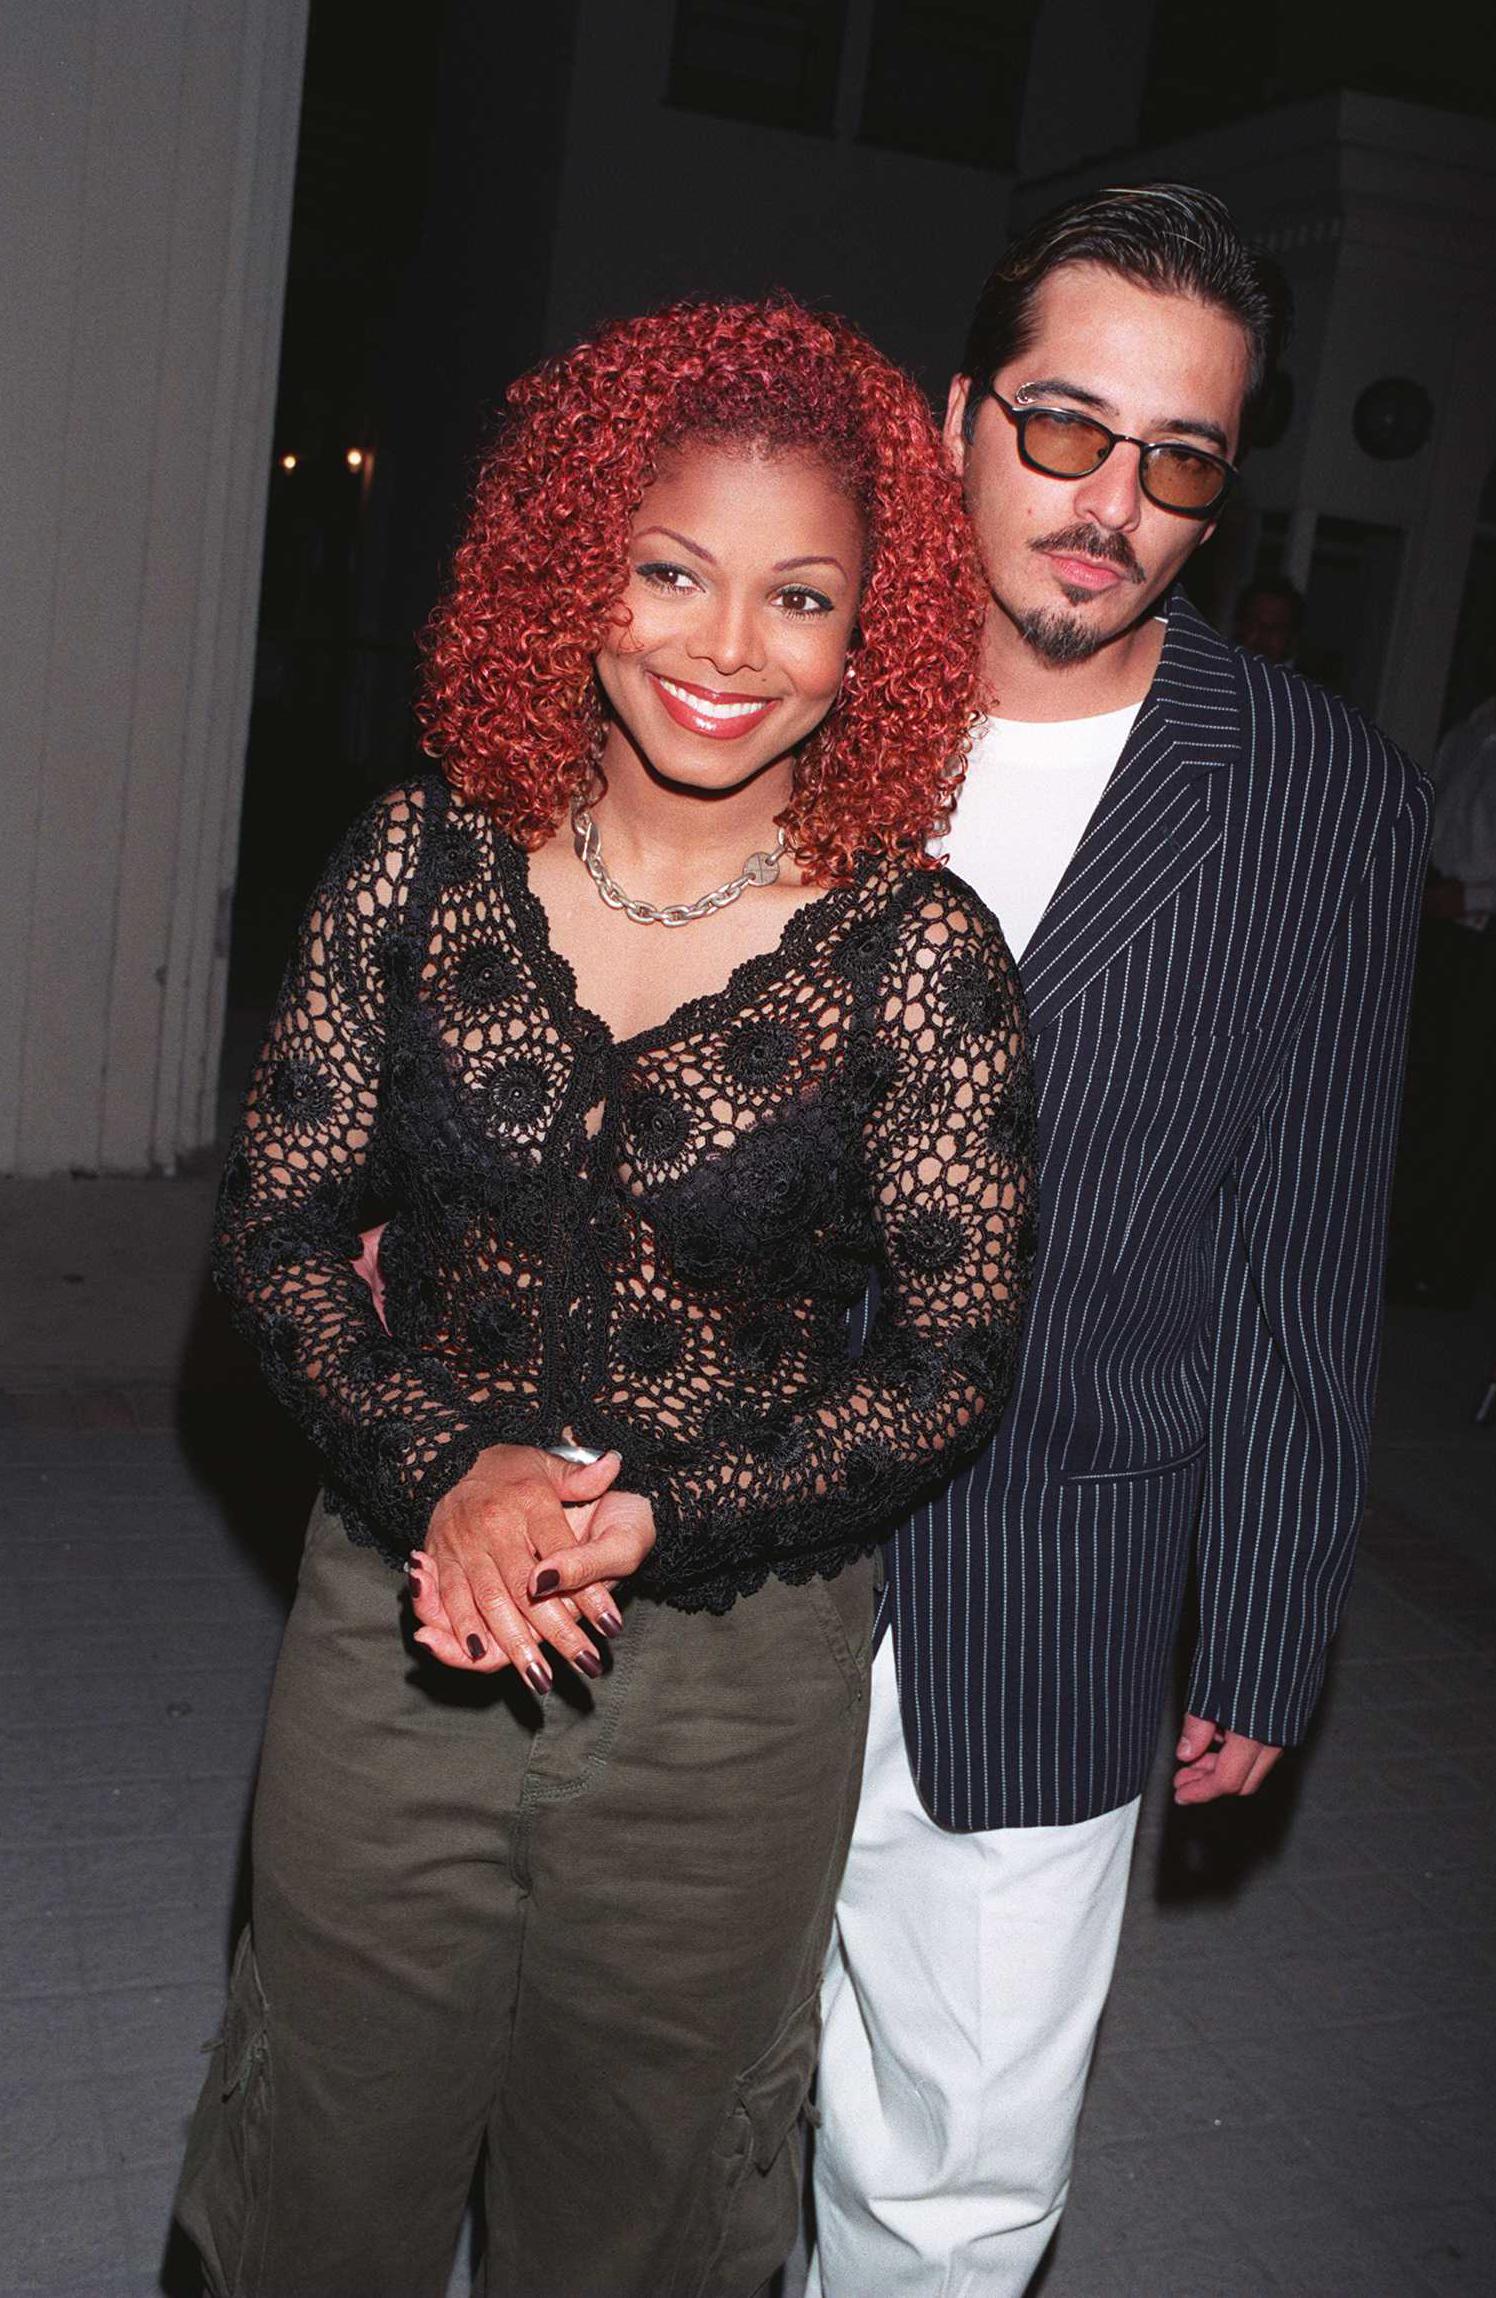 Janet Jackson with Rene Elizondo at the launch party of her new album, "The Velvet Rope" September 9, 1997, in Culver City, CA. | Source: Getty Images